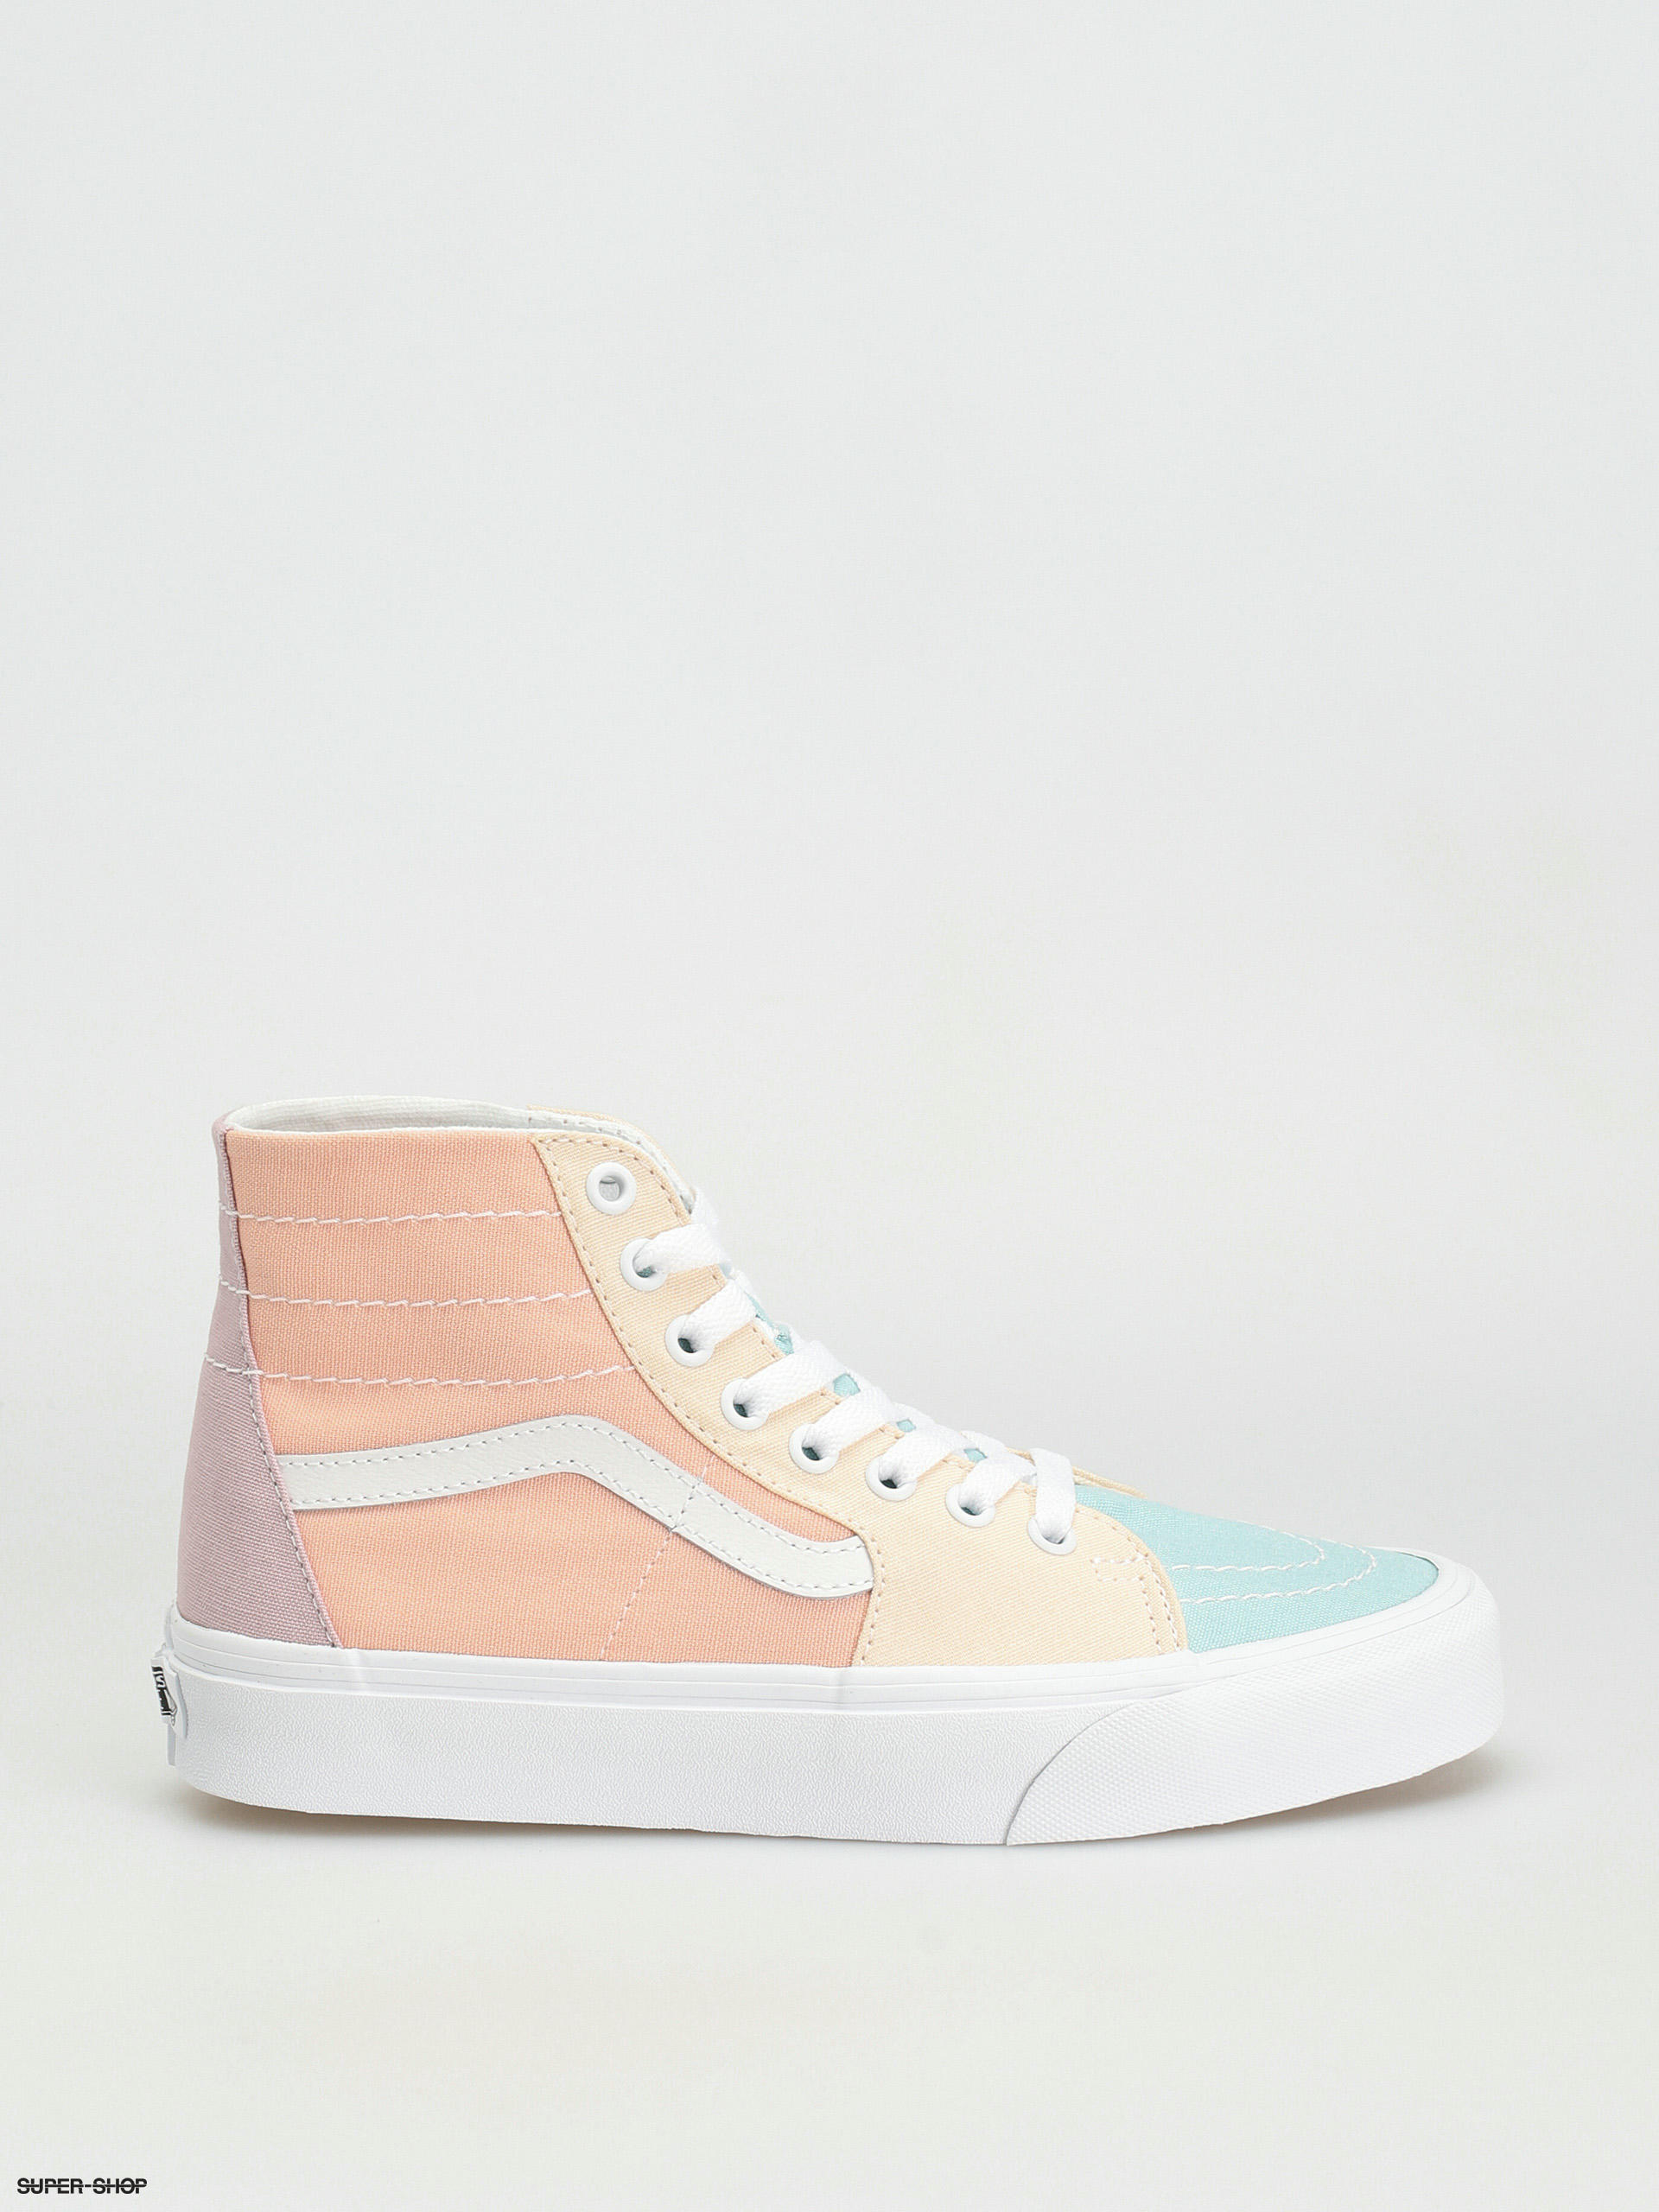 ₊˚ ραrк єυทнα ◜ ˗ˏˋ🍫ˎˊ˗ | Pastel shoes, Pretty shoes sneakers, Yellow  aesthetic pastel